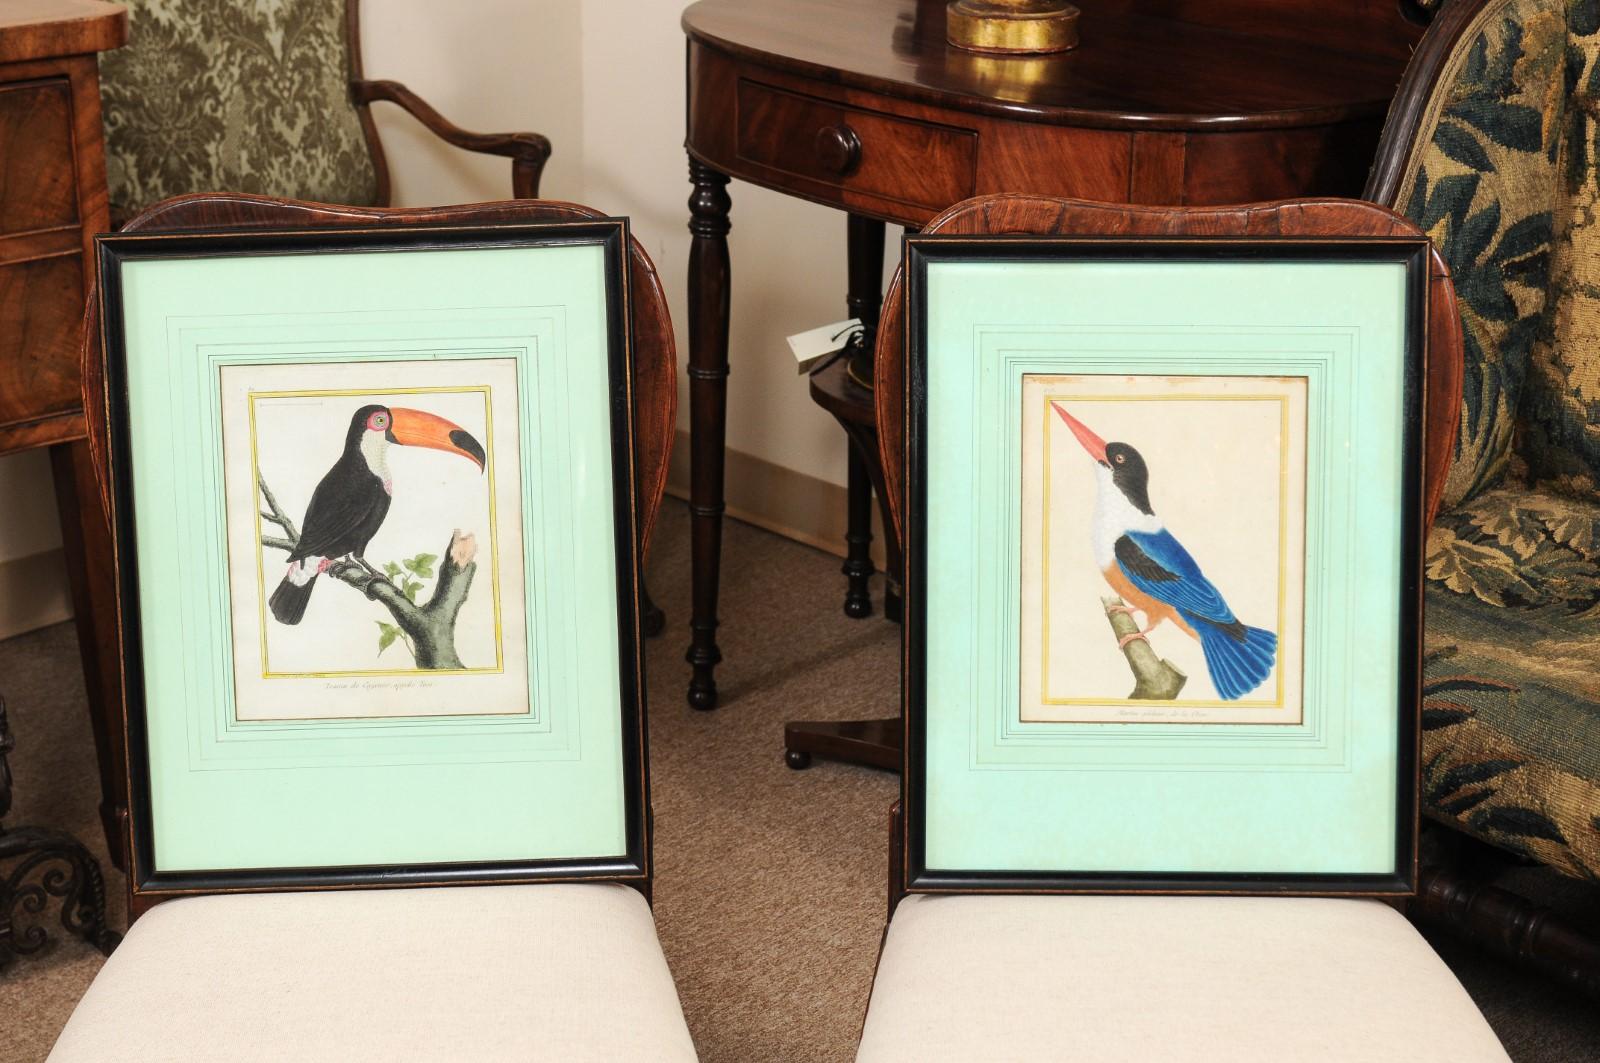 The pair of Martinet bird engravings with later hand coloring in black, white, orange and blue hues. The engravings matted in a sea-foam green with black painted frames.



 